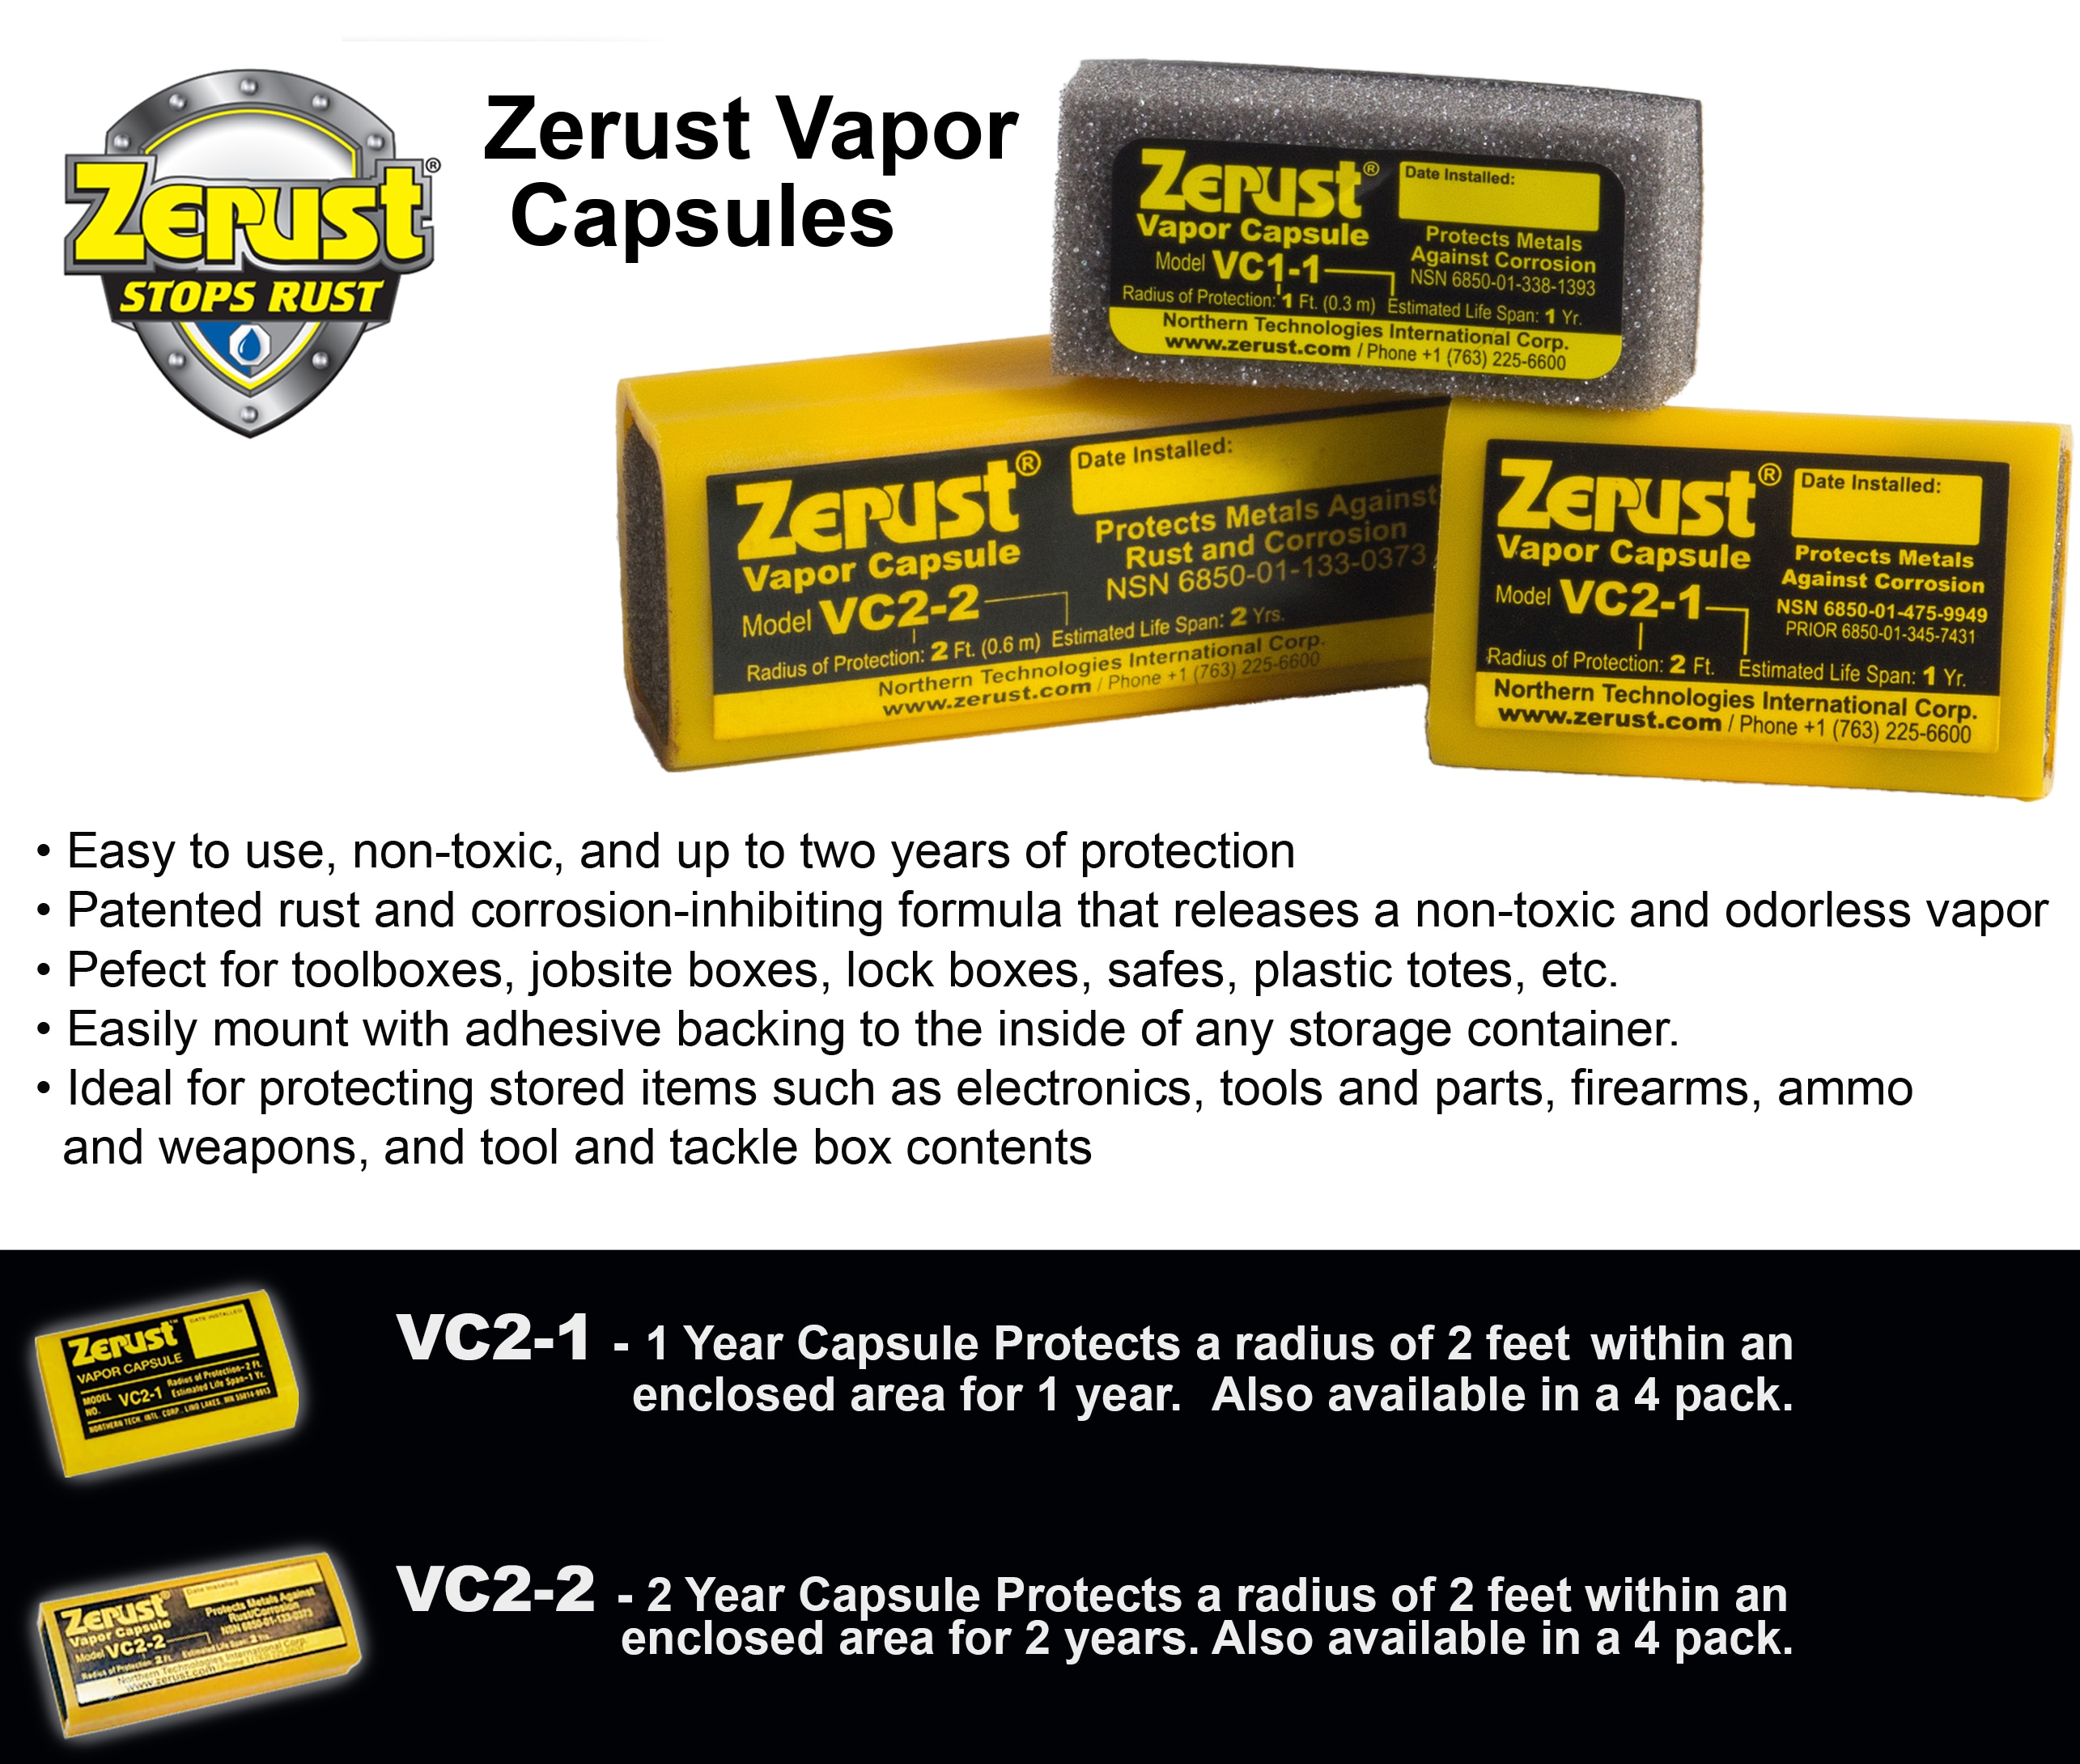 Prevent Home Gym Equipment Rust and Corrosion - Zerust Rust